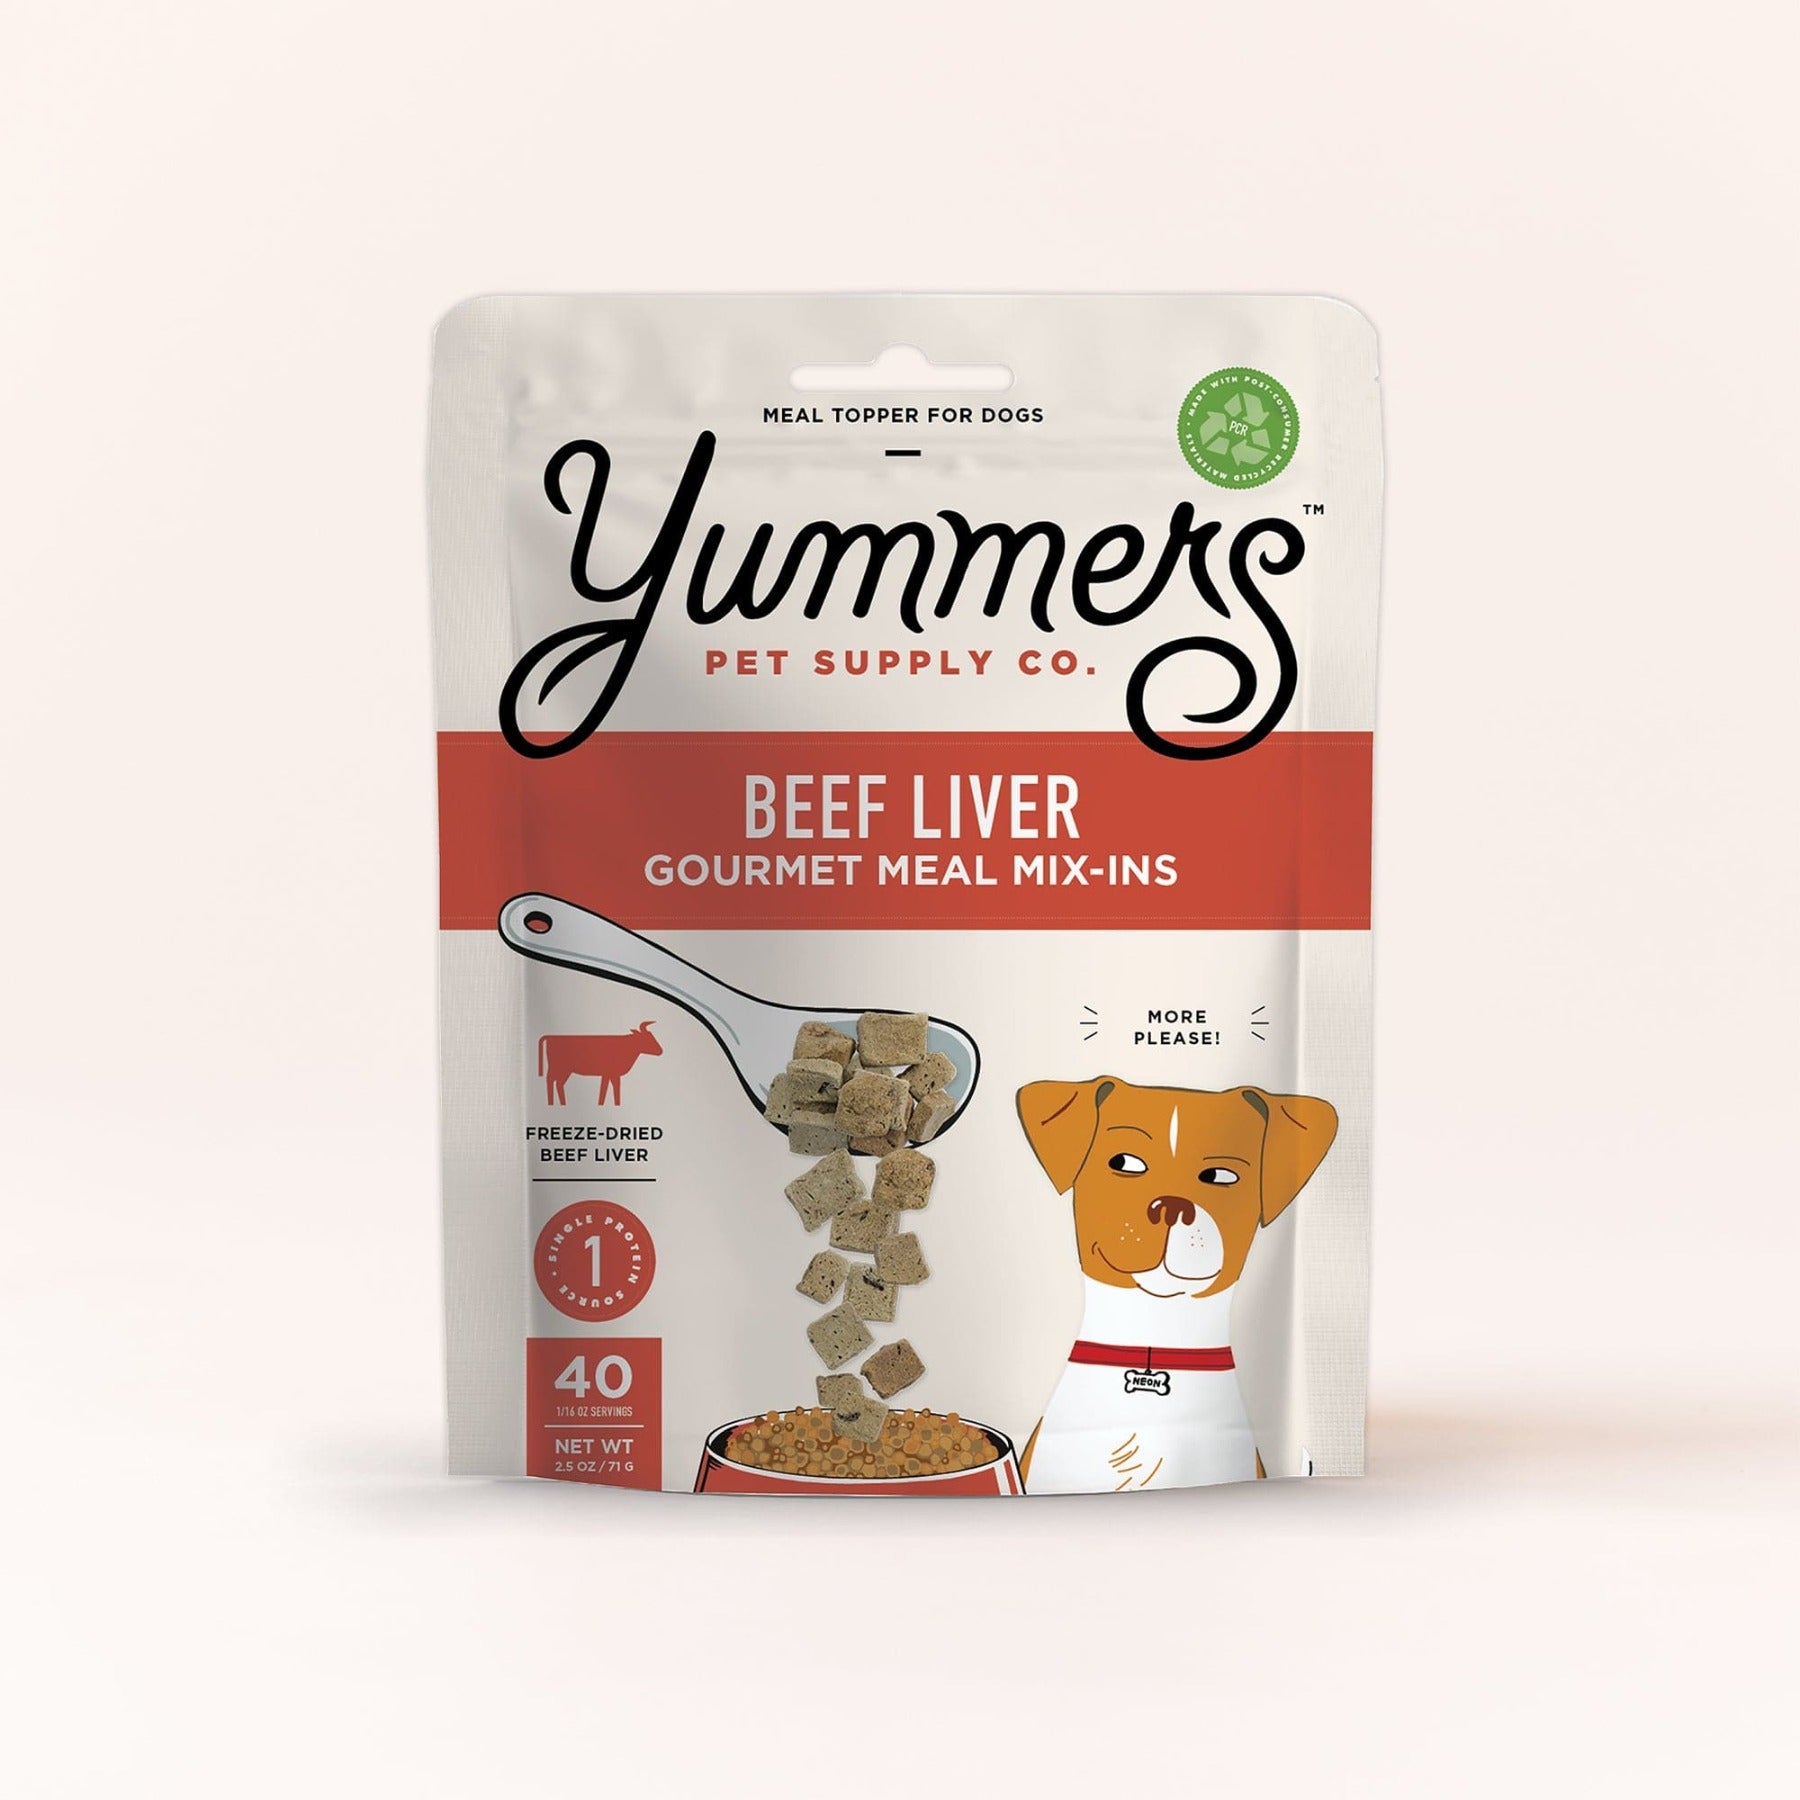 Yummers Freeze-dried Beef Liver for Dogs